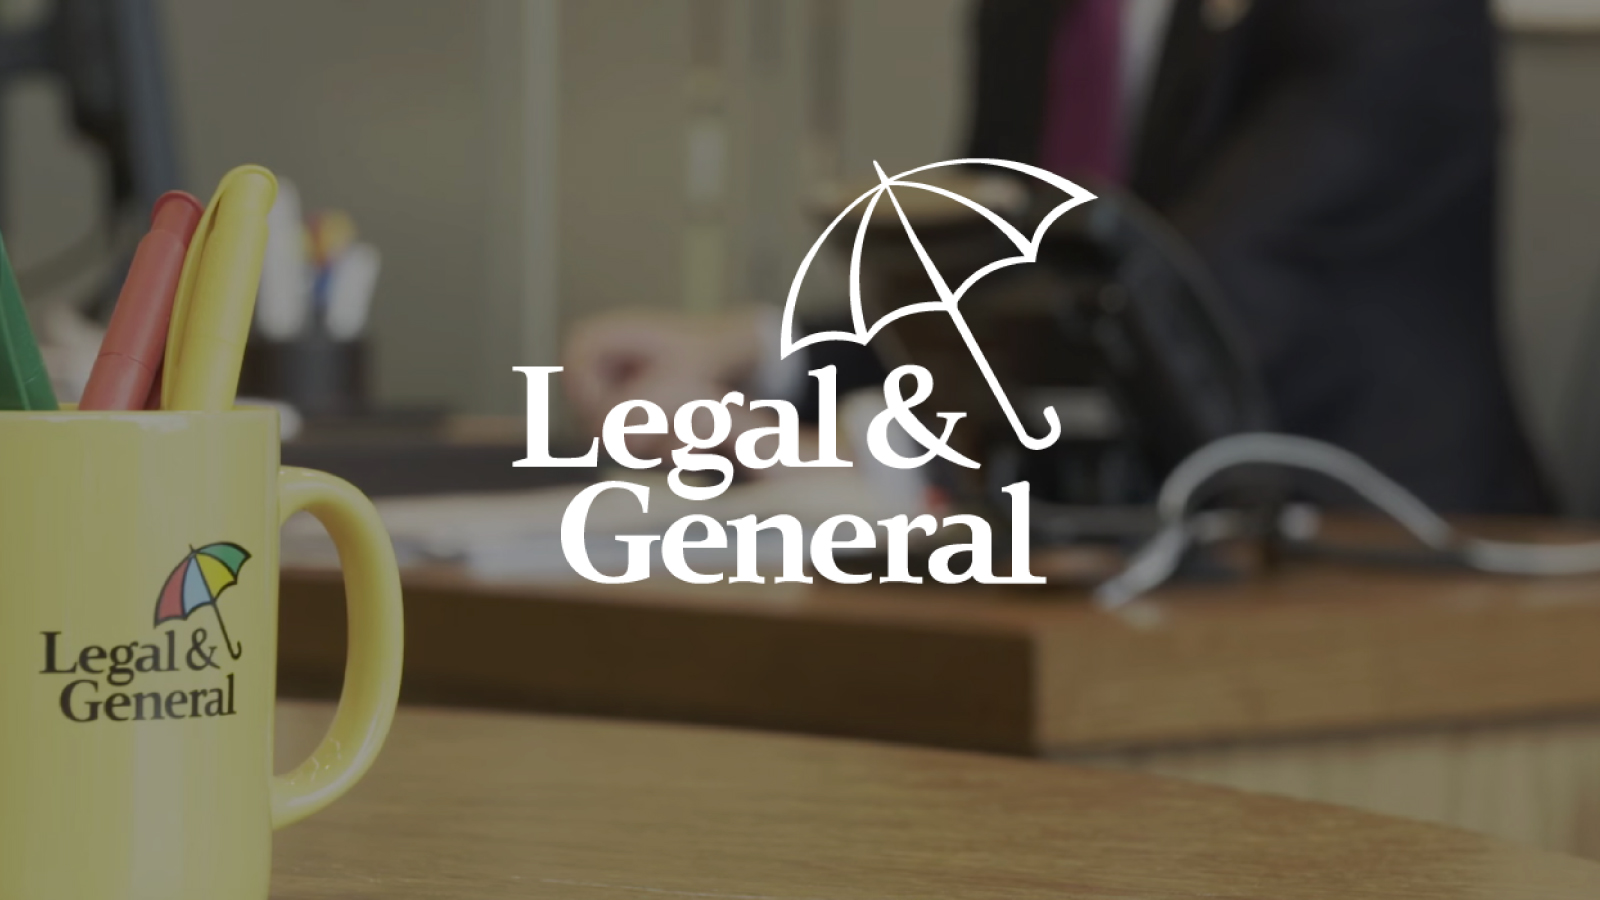 Graphic: legal office setting with Legal & General logo overlayed